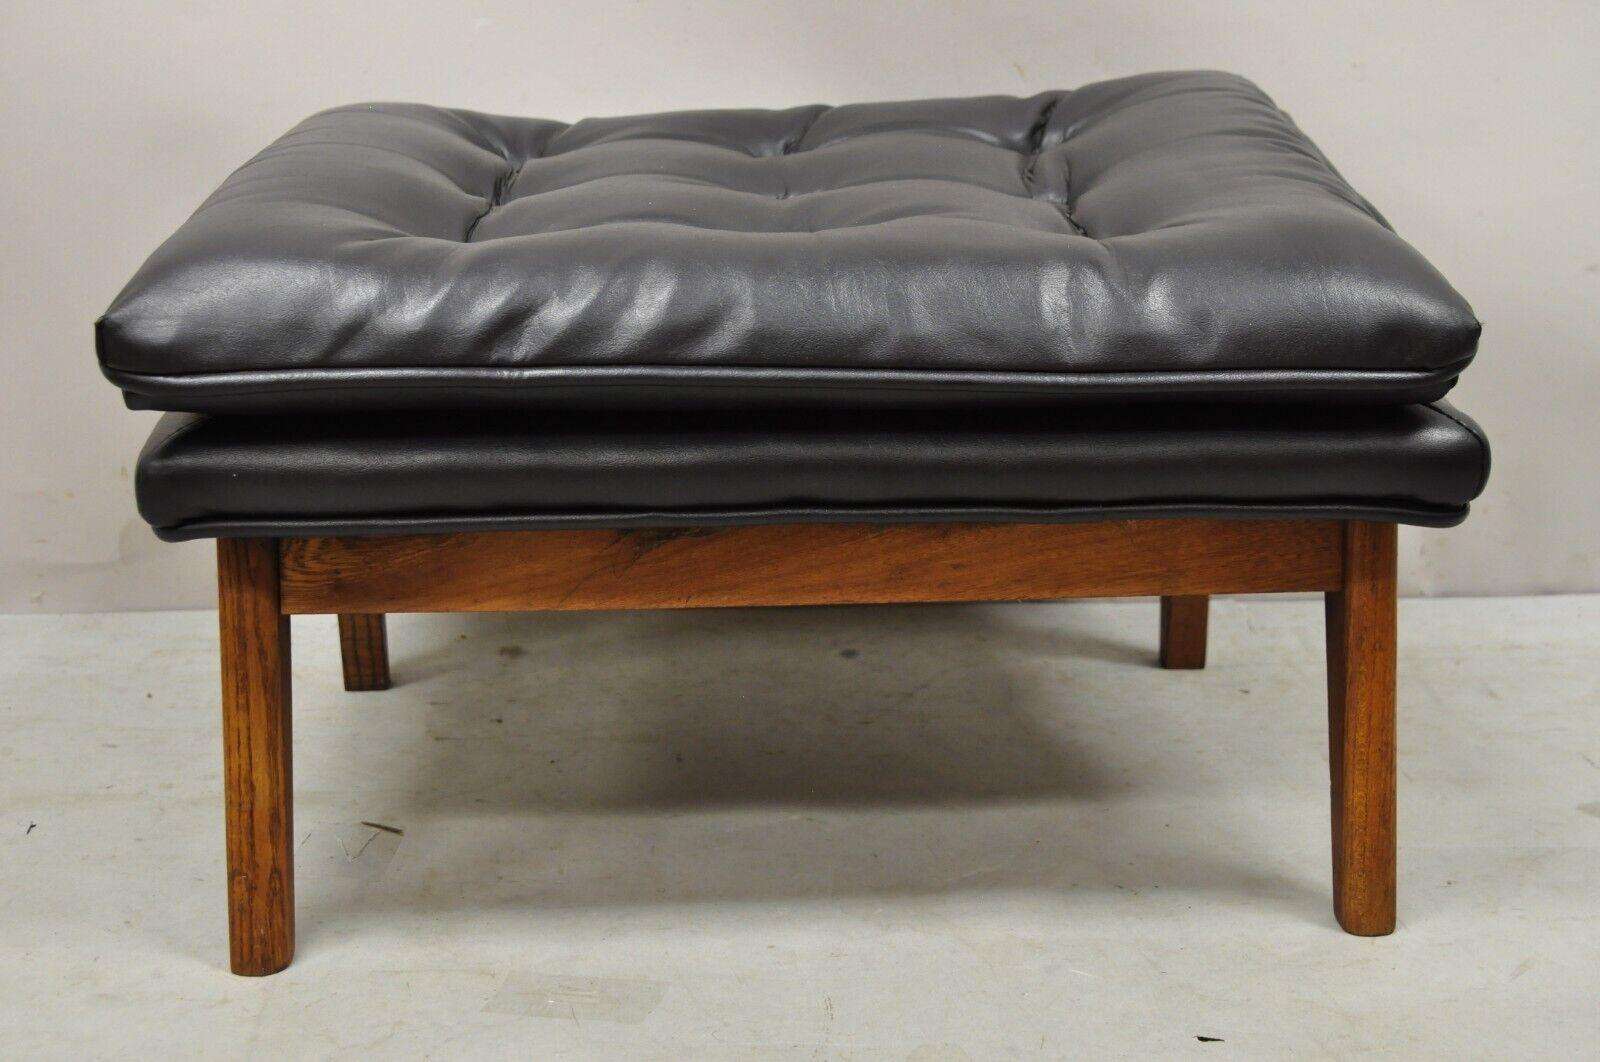 Vintage Mid-Century Modern black tufted vinyl lounge chair footstool ottoman. Item features black button tufted vinyl upholstery, solid wood frame, beautiful wood grain, tapered legs, clean modernist lines, quality American craftsmanship. Circa